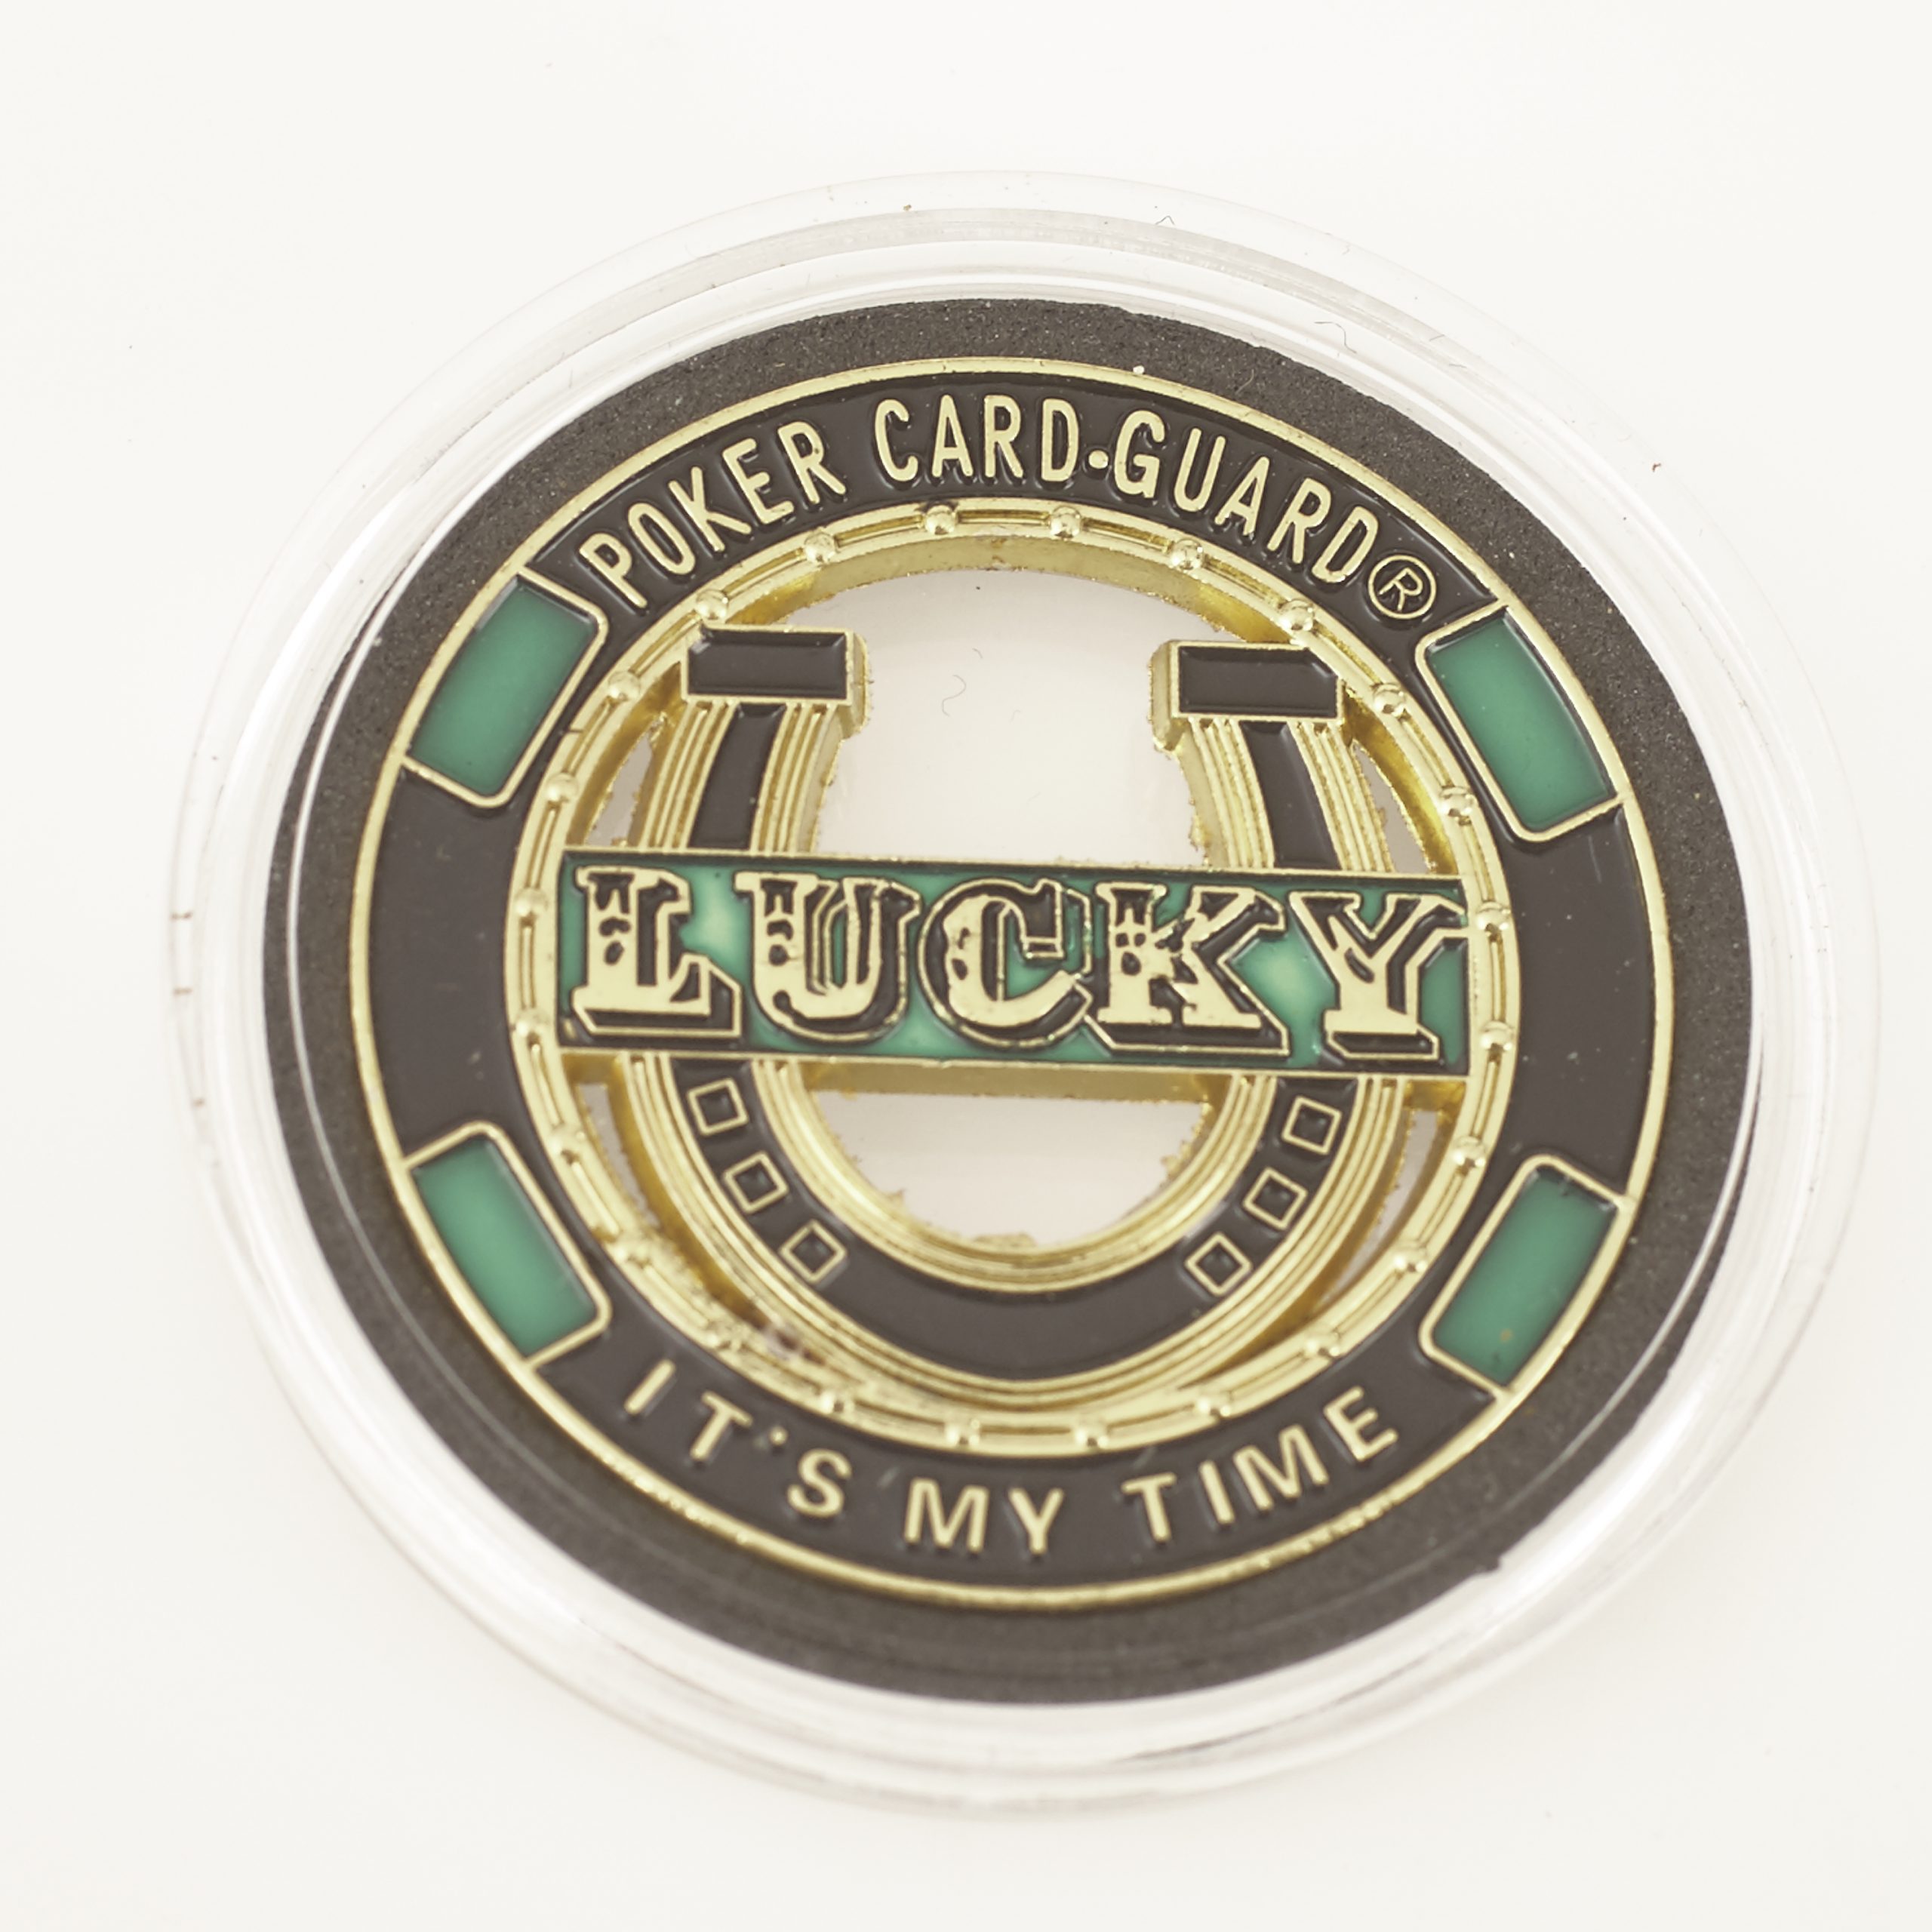 LUCKY, IT’S MY TIME, Poker Card Guard